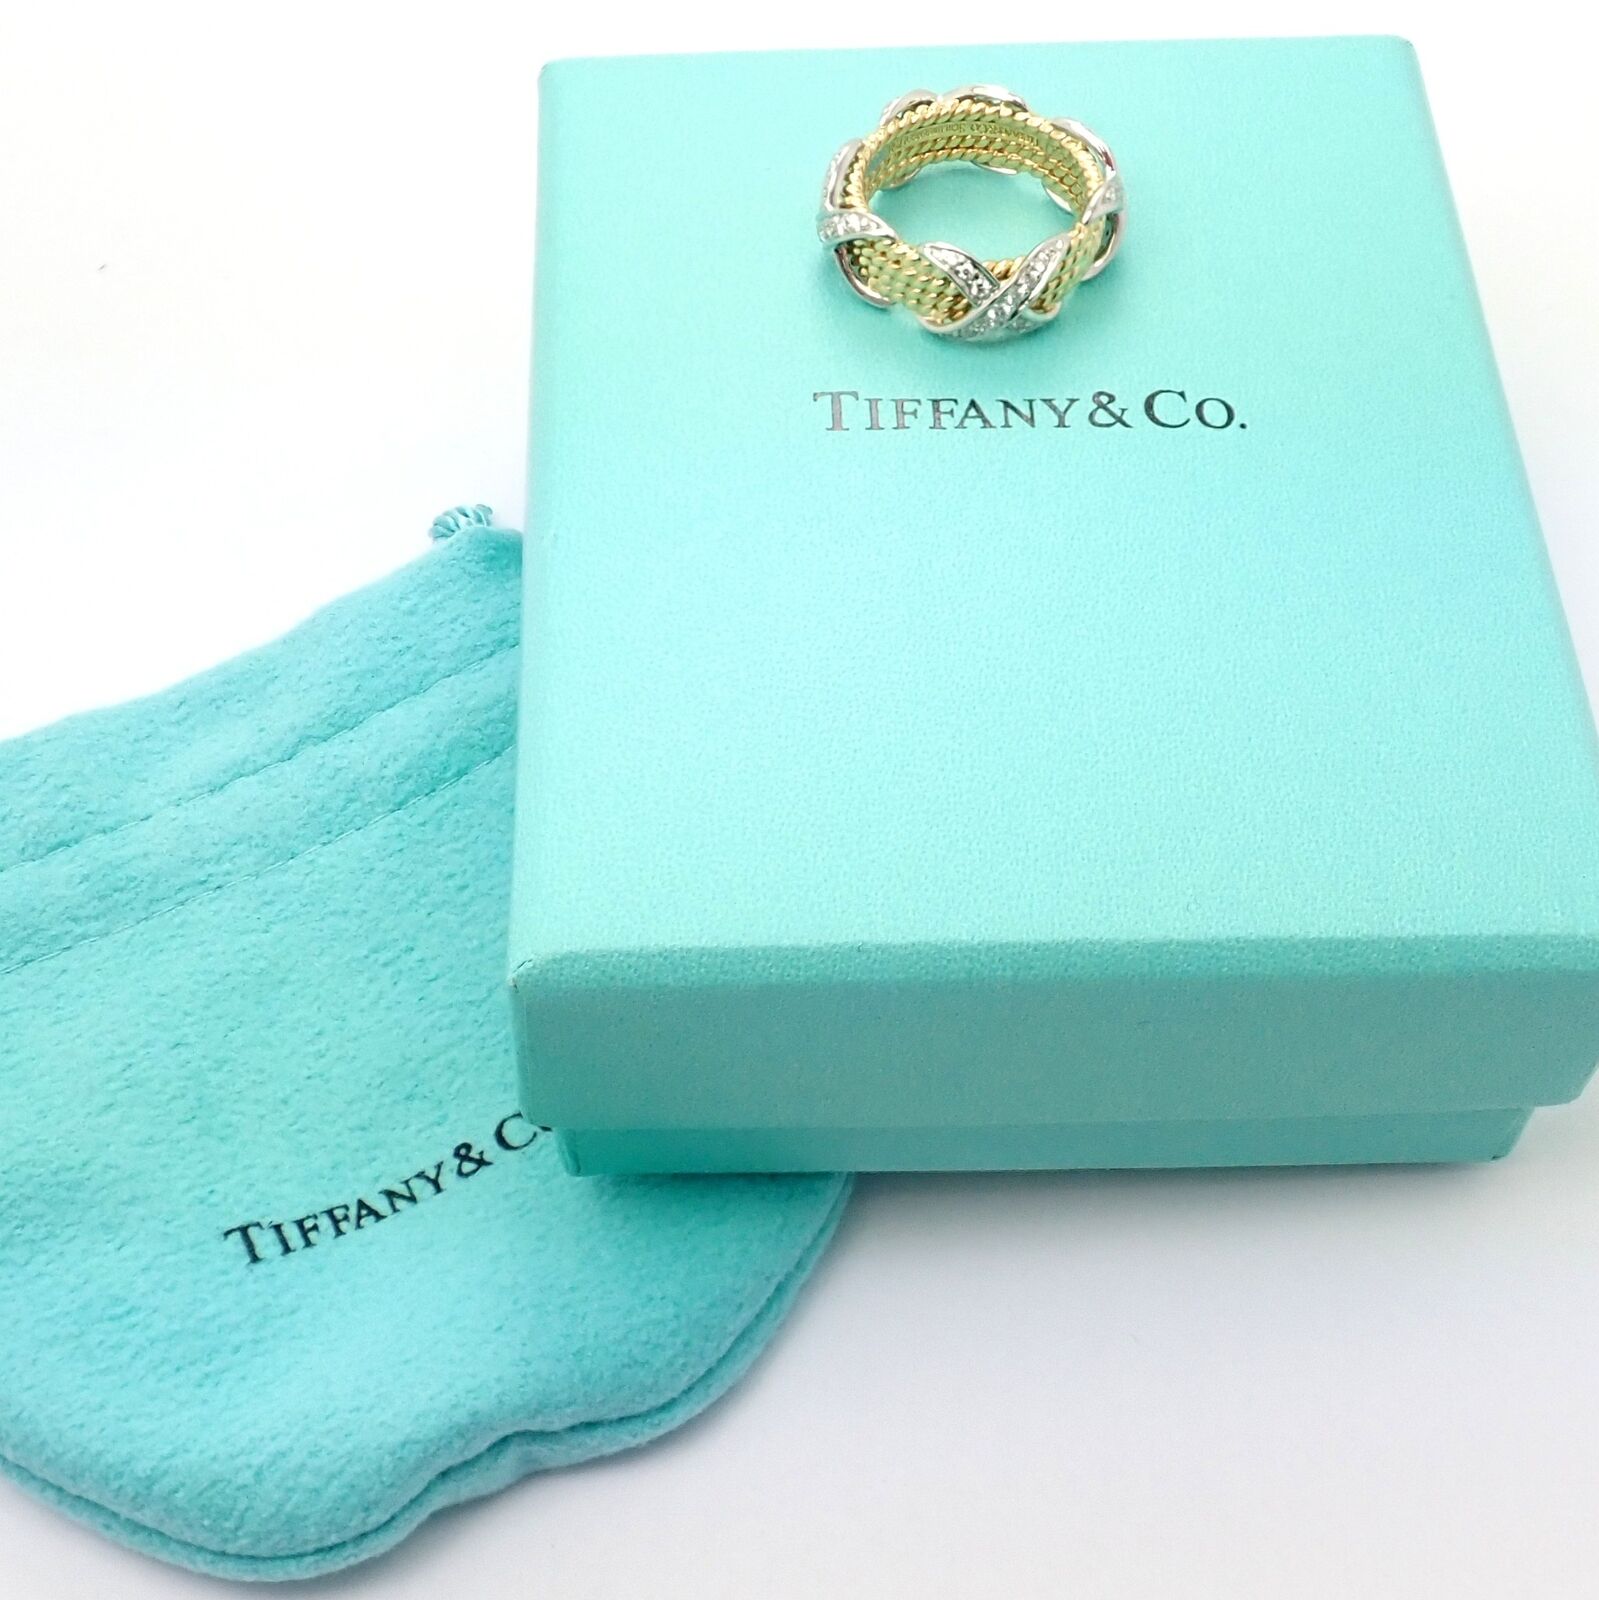 Tiffany & Co 925 Loving Heart Ring size 7.25 4.6g - Quality Coin and Gold